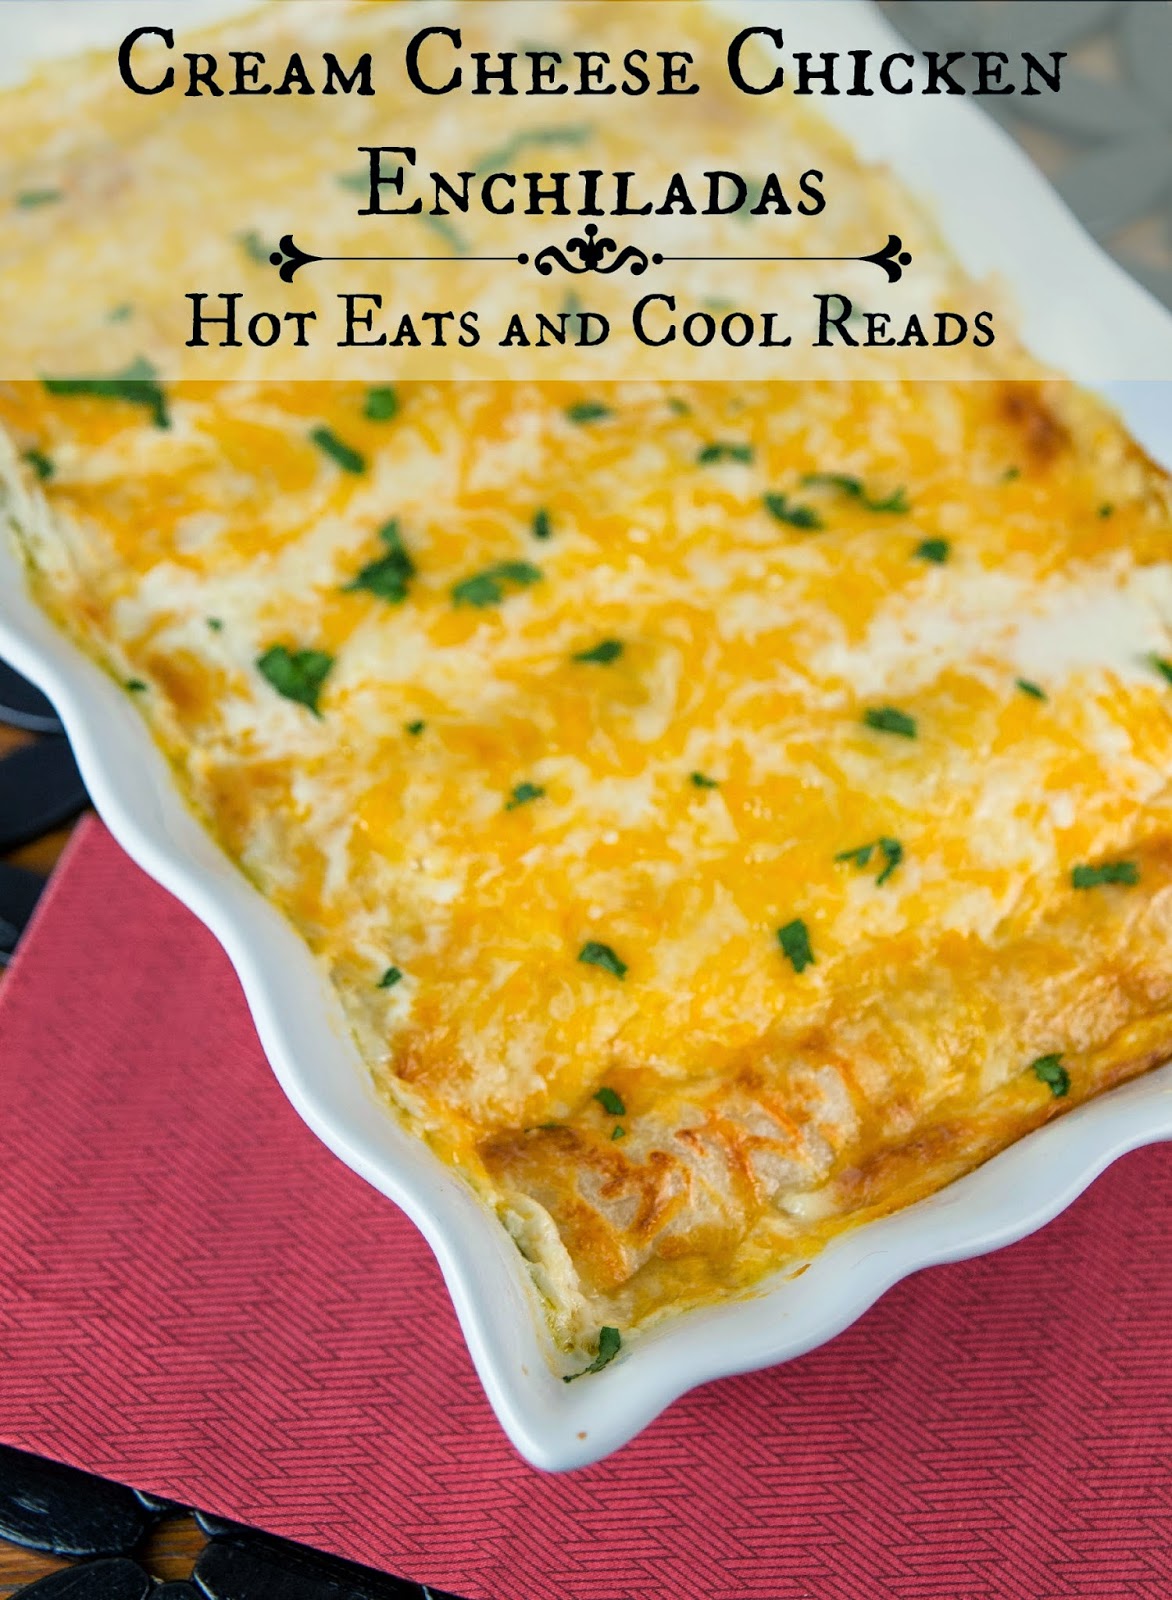 Hot Eats and Cool Reads: Cream Cheese Chicken Enchiladas Recipe